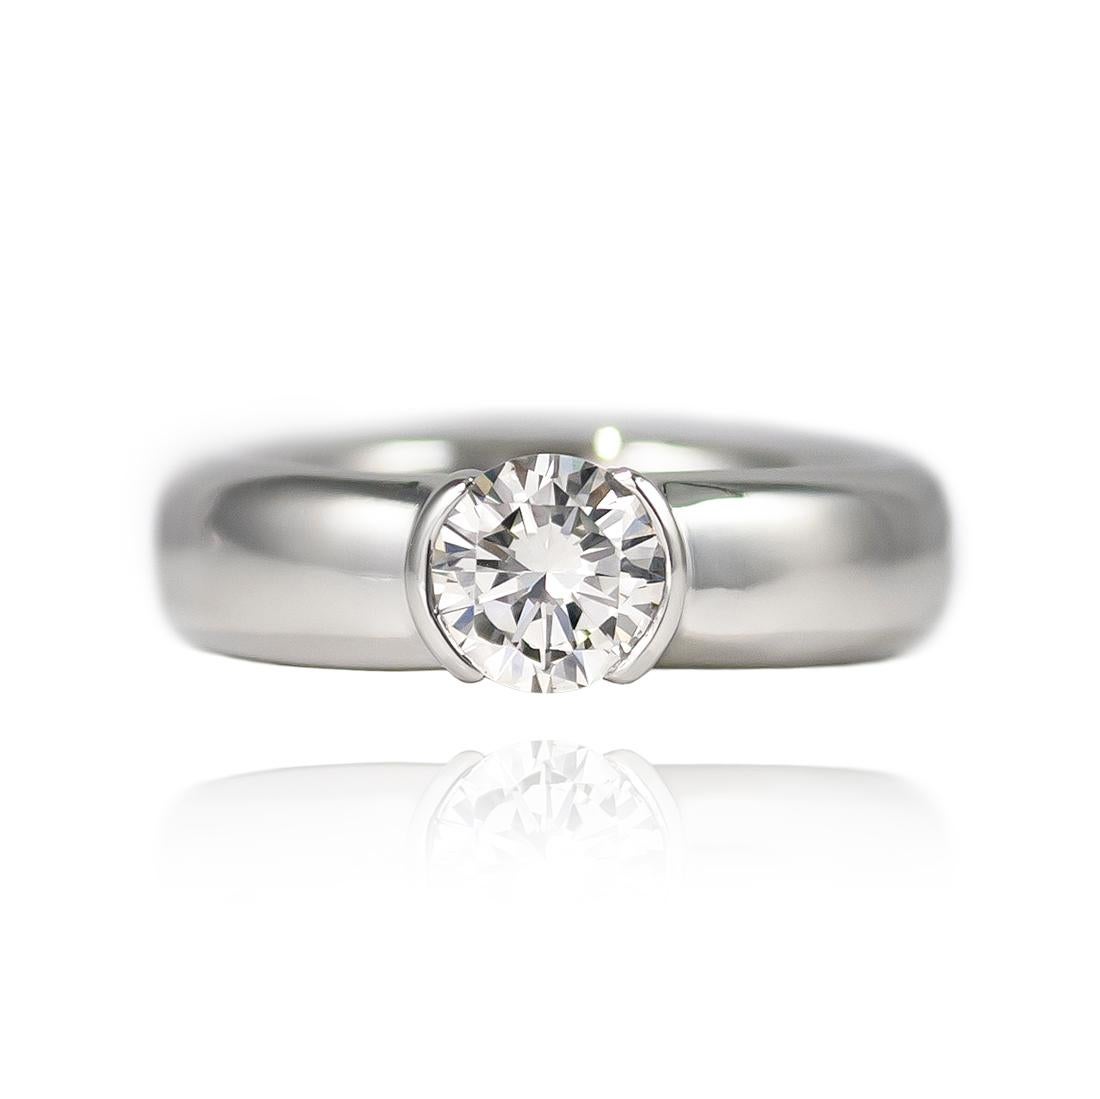 This beautiful, signed Tiffany & Co. Etoile Solitaire ring features a 0.75 ct Brilliant Round diamond of H color and VS1 clarity. The perfect choice for a modern bride, this ring is a contemporary alternative to the traditional solitaire engagement